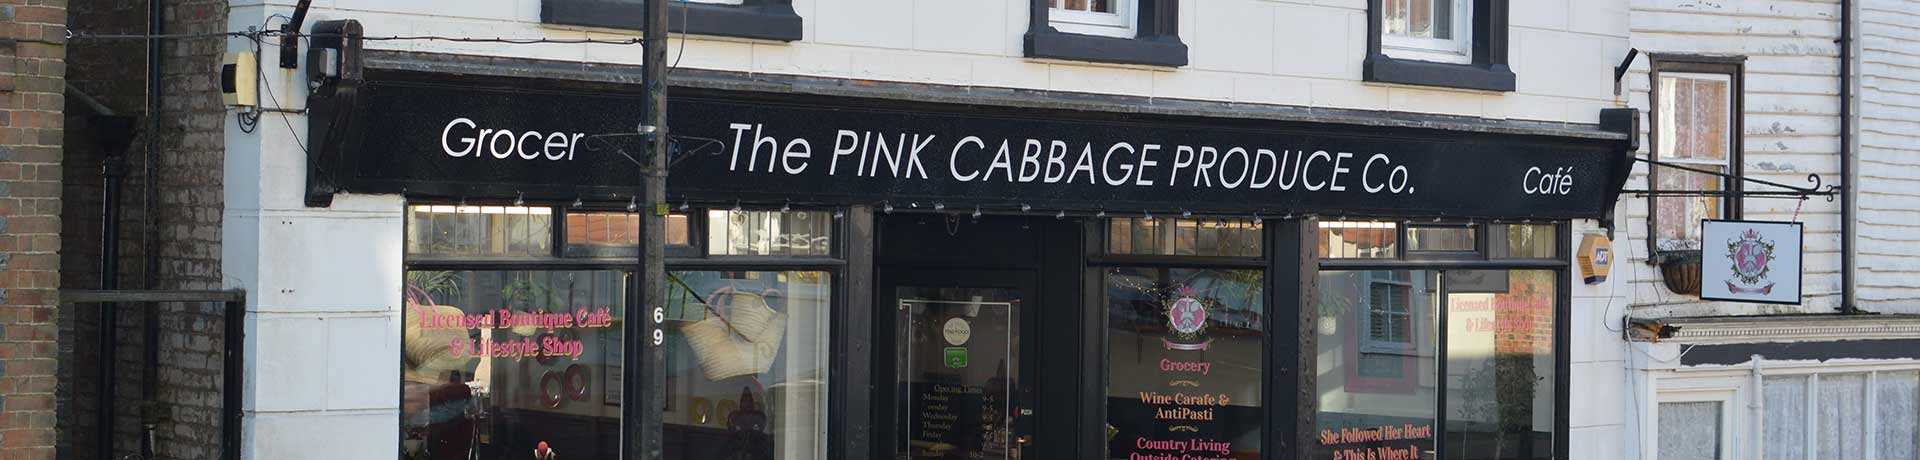 Breakfast at The Pink Cabbage